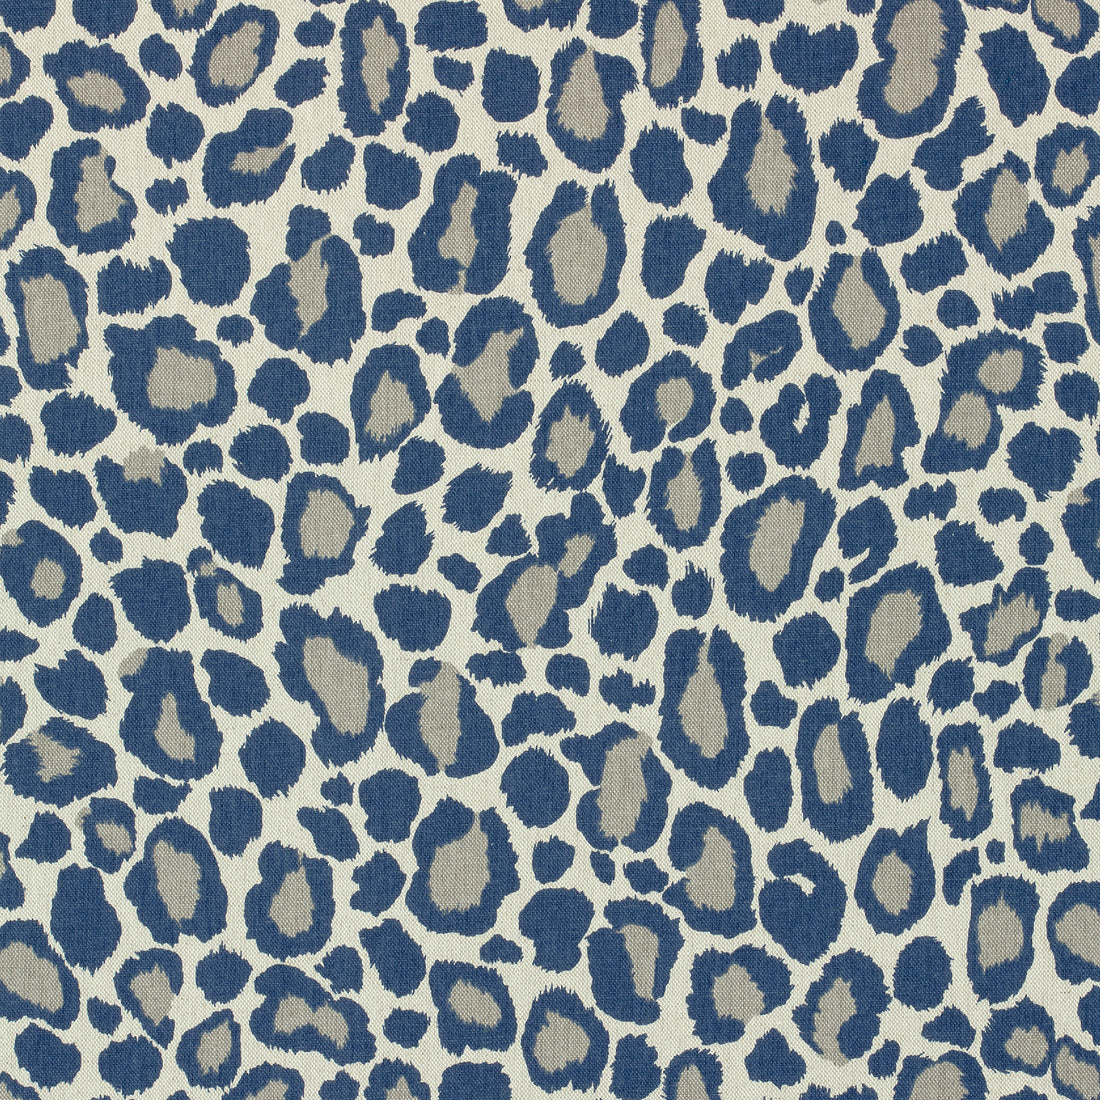 African Leopard fabric in navy color - pattern number AF72981 - by Anna French in the Manor collection